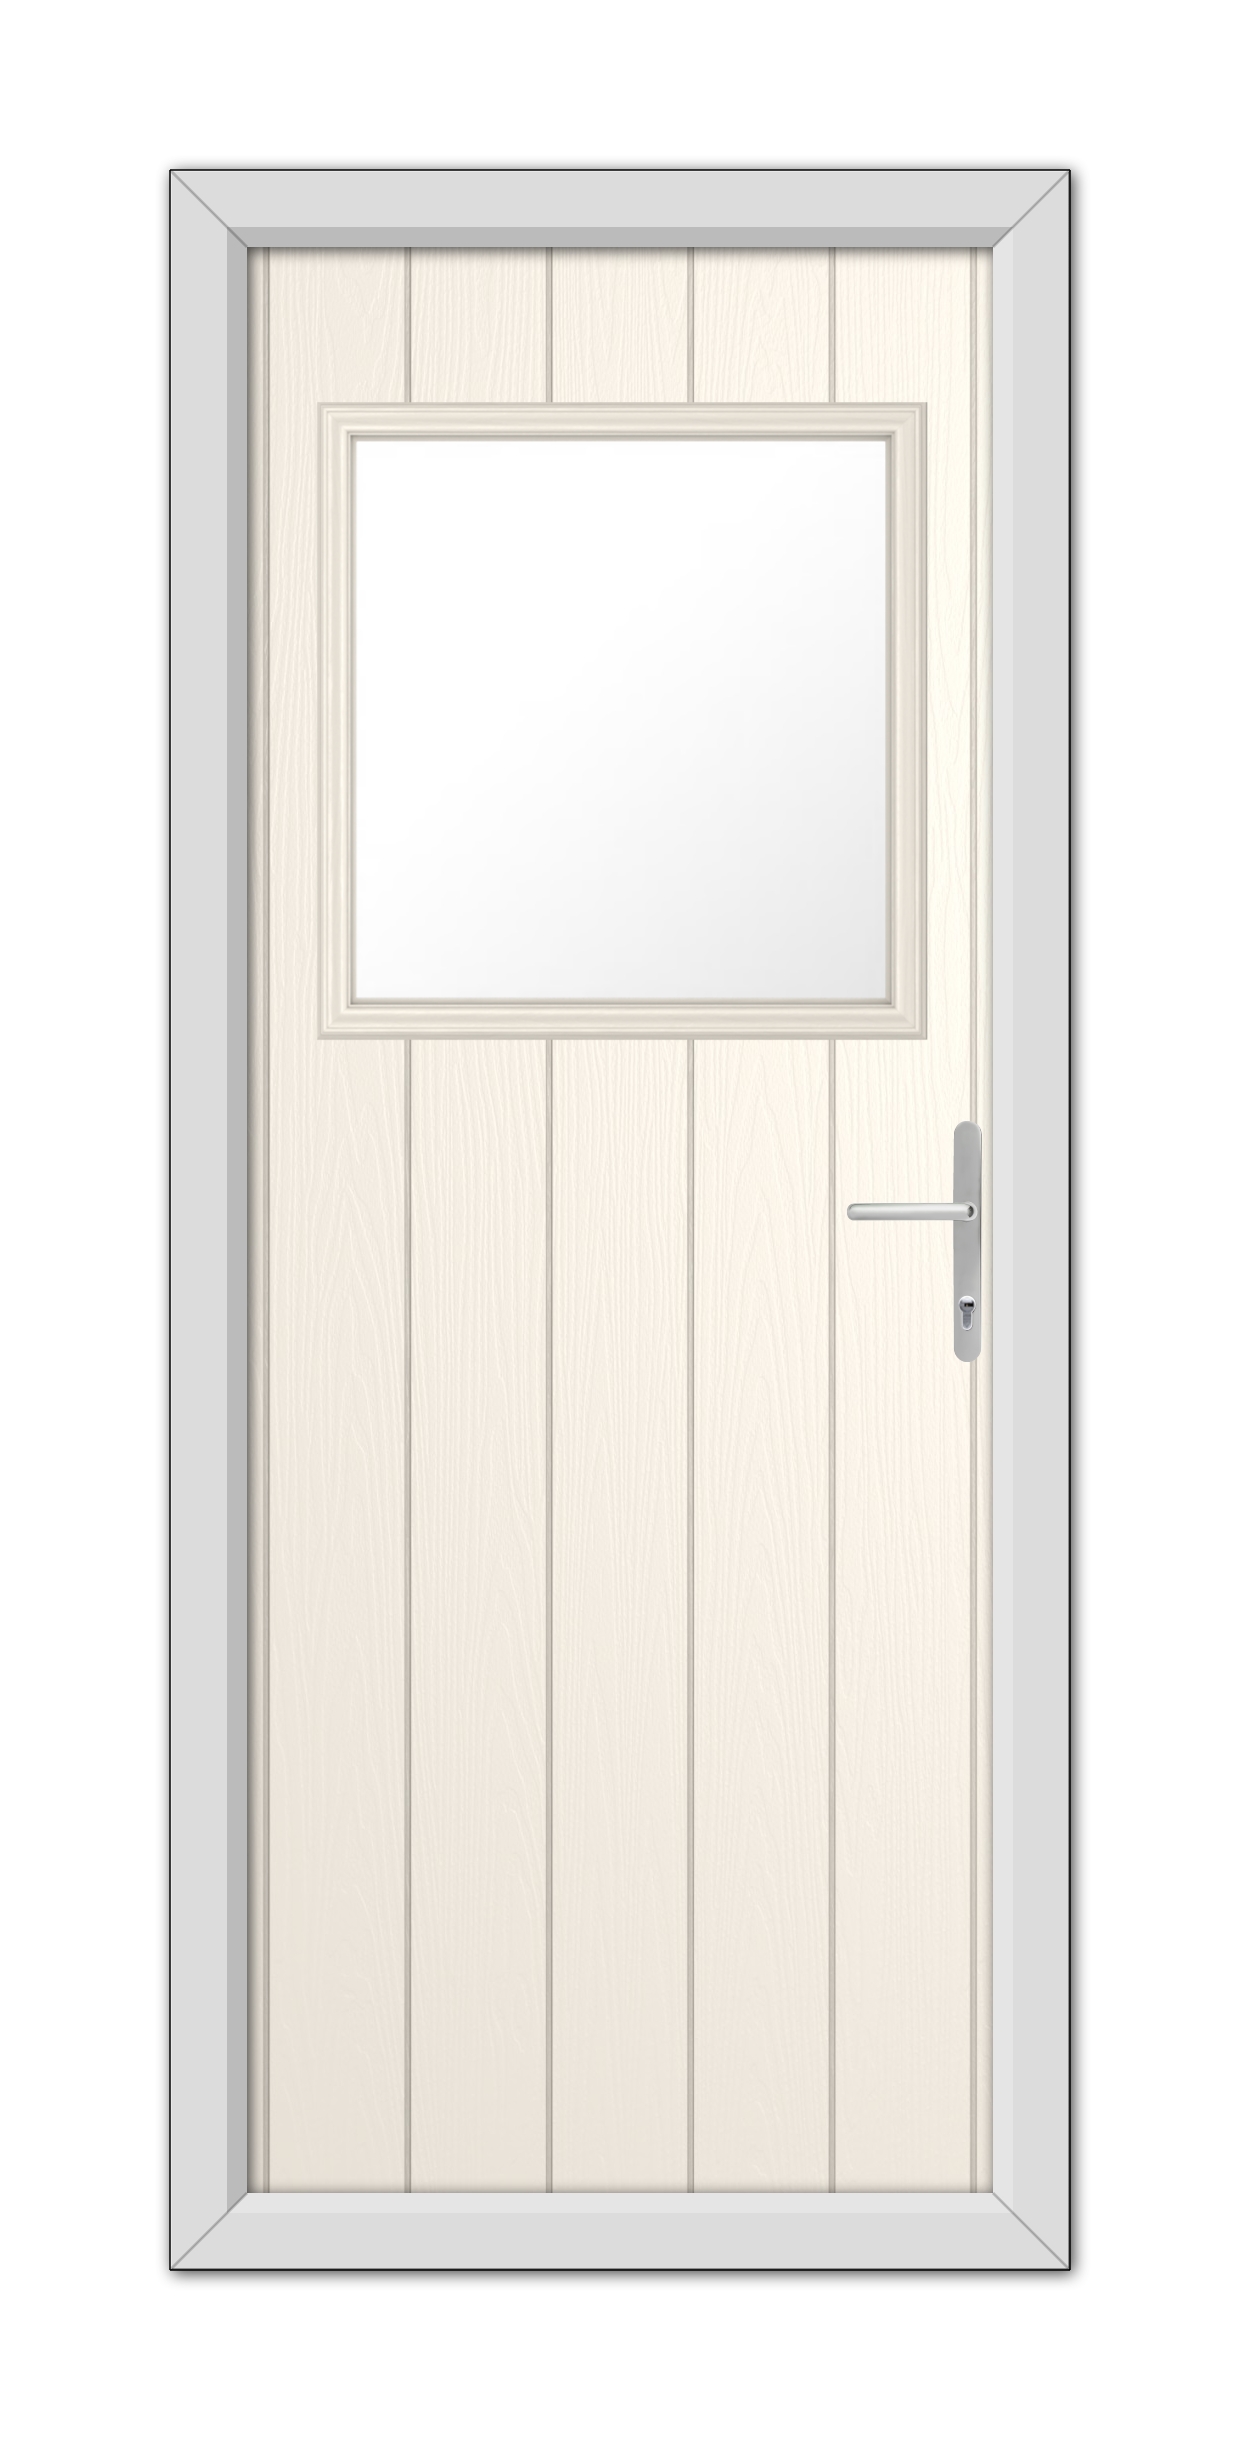 A White Foil Fife Composite Door 48mm Timber Core with a rectangular glass window at the top, finished in a light beige tone, featuring a modern handle on the right side.